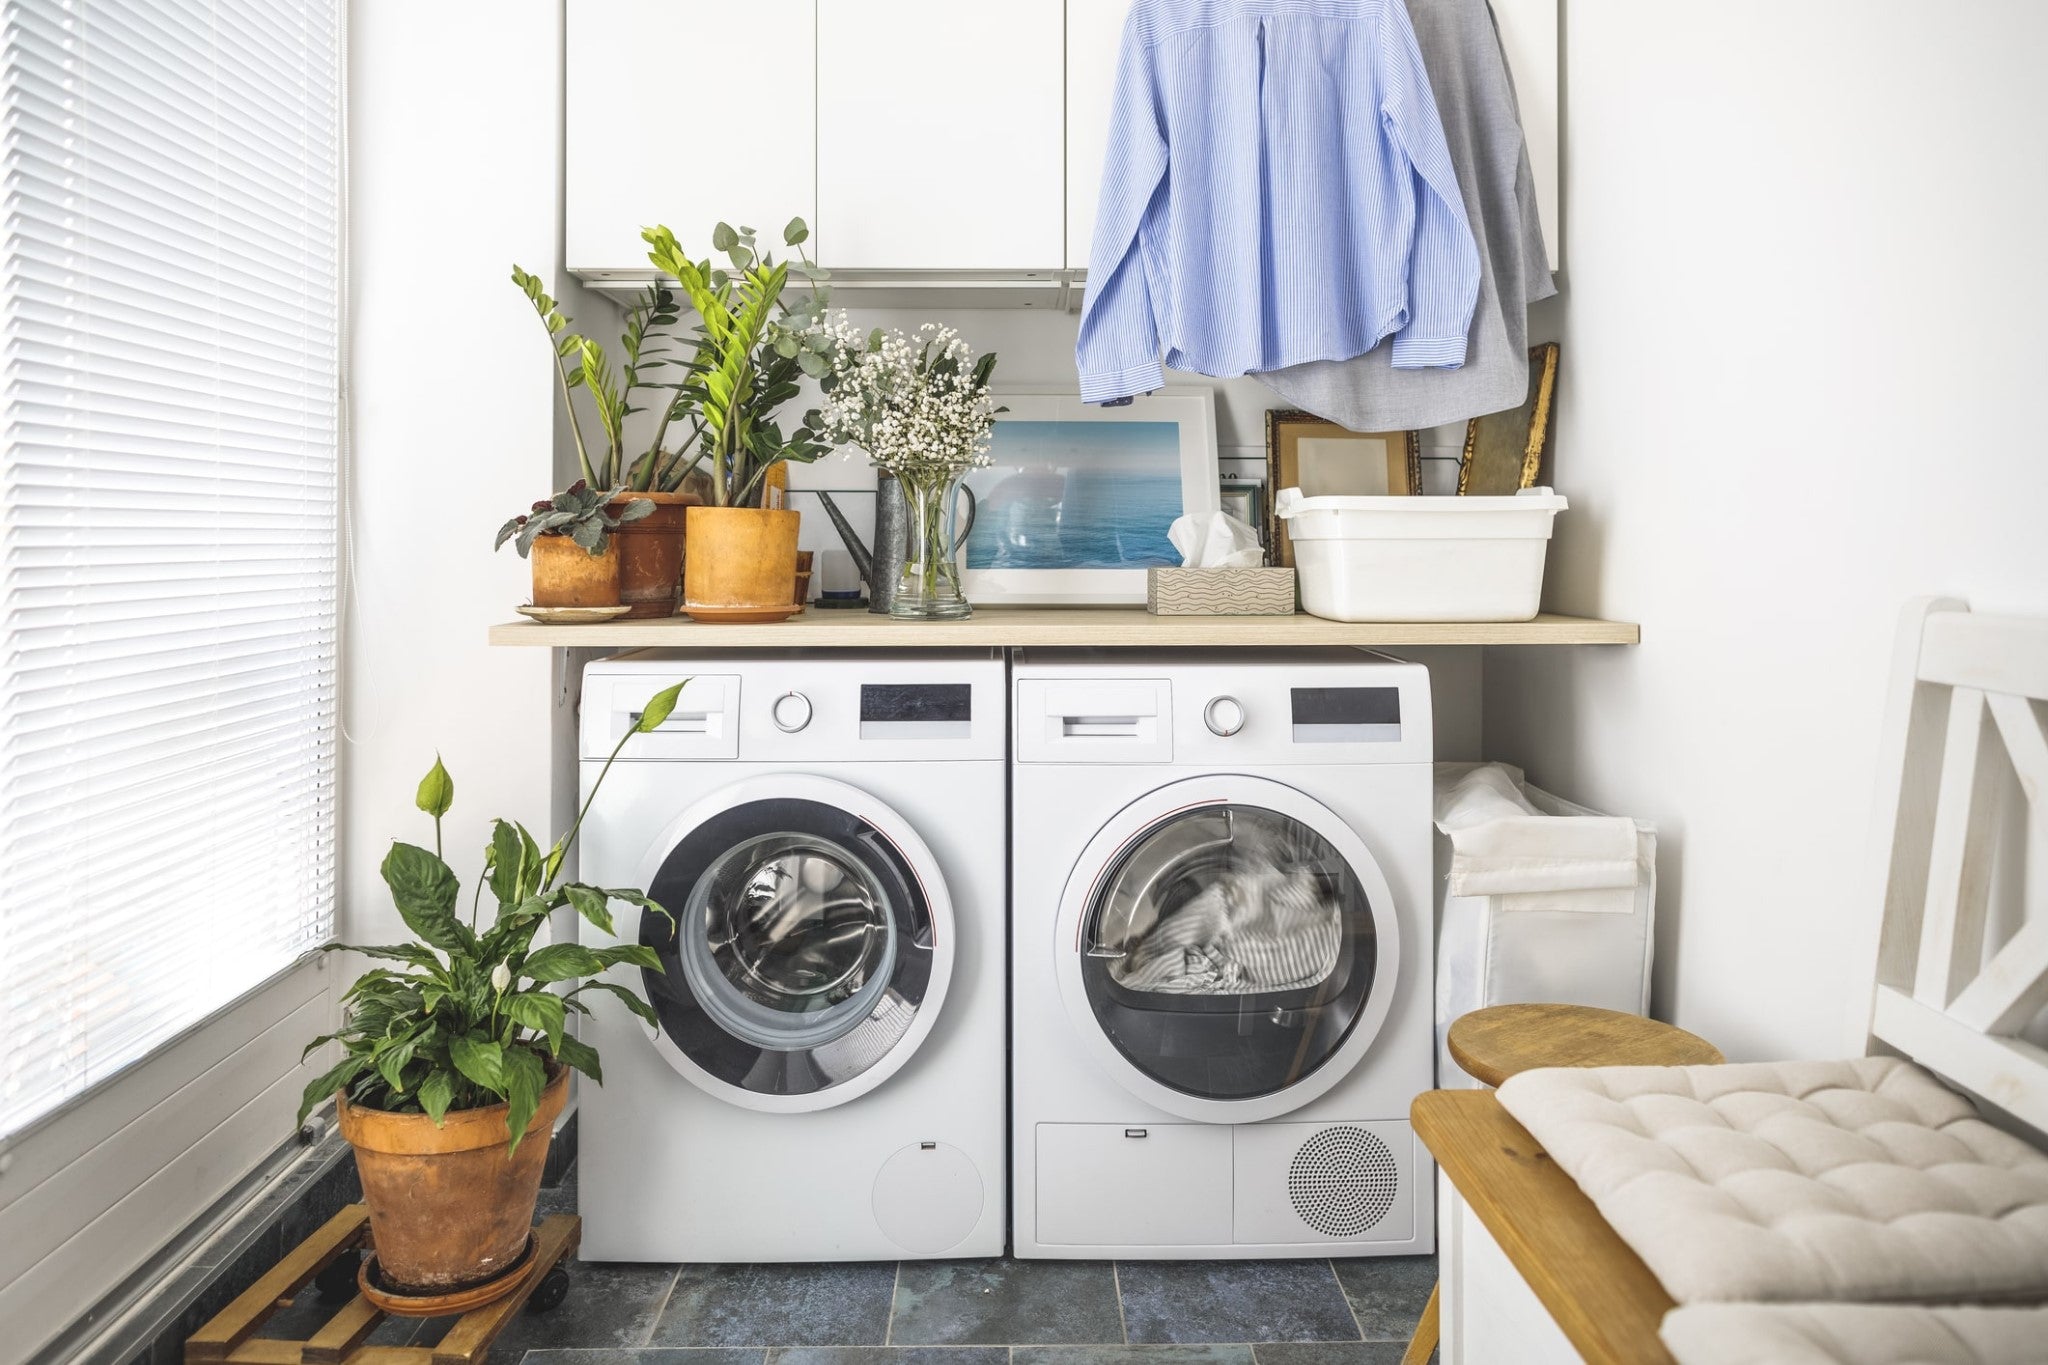 How Does Doing Laundry Affect the Environment